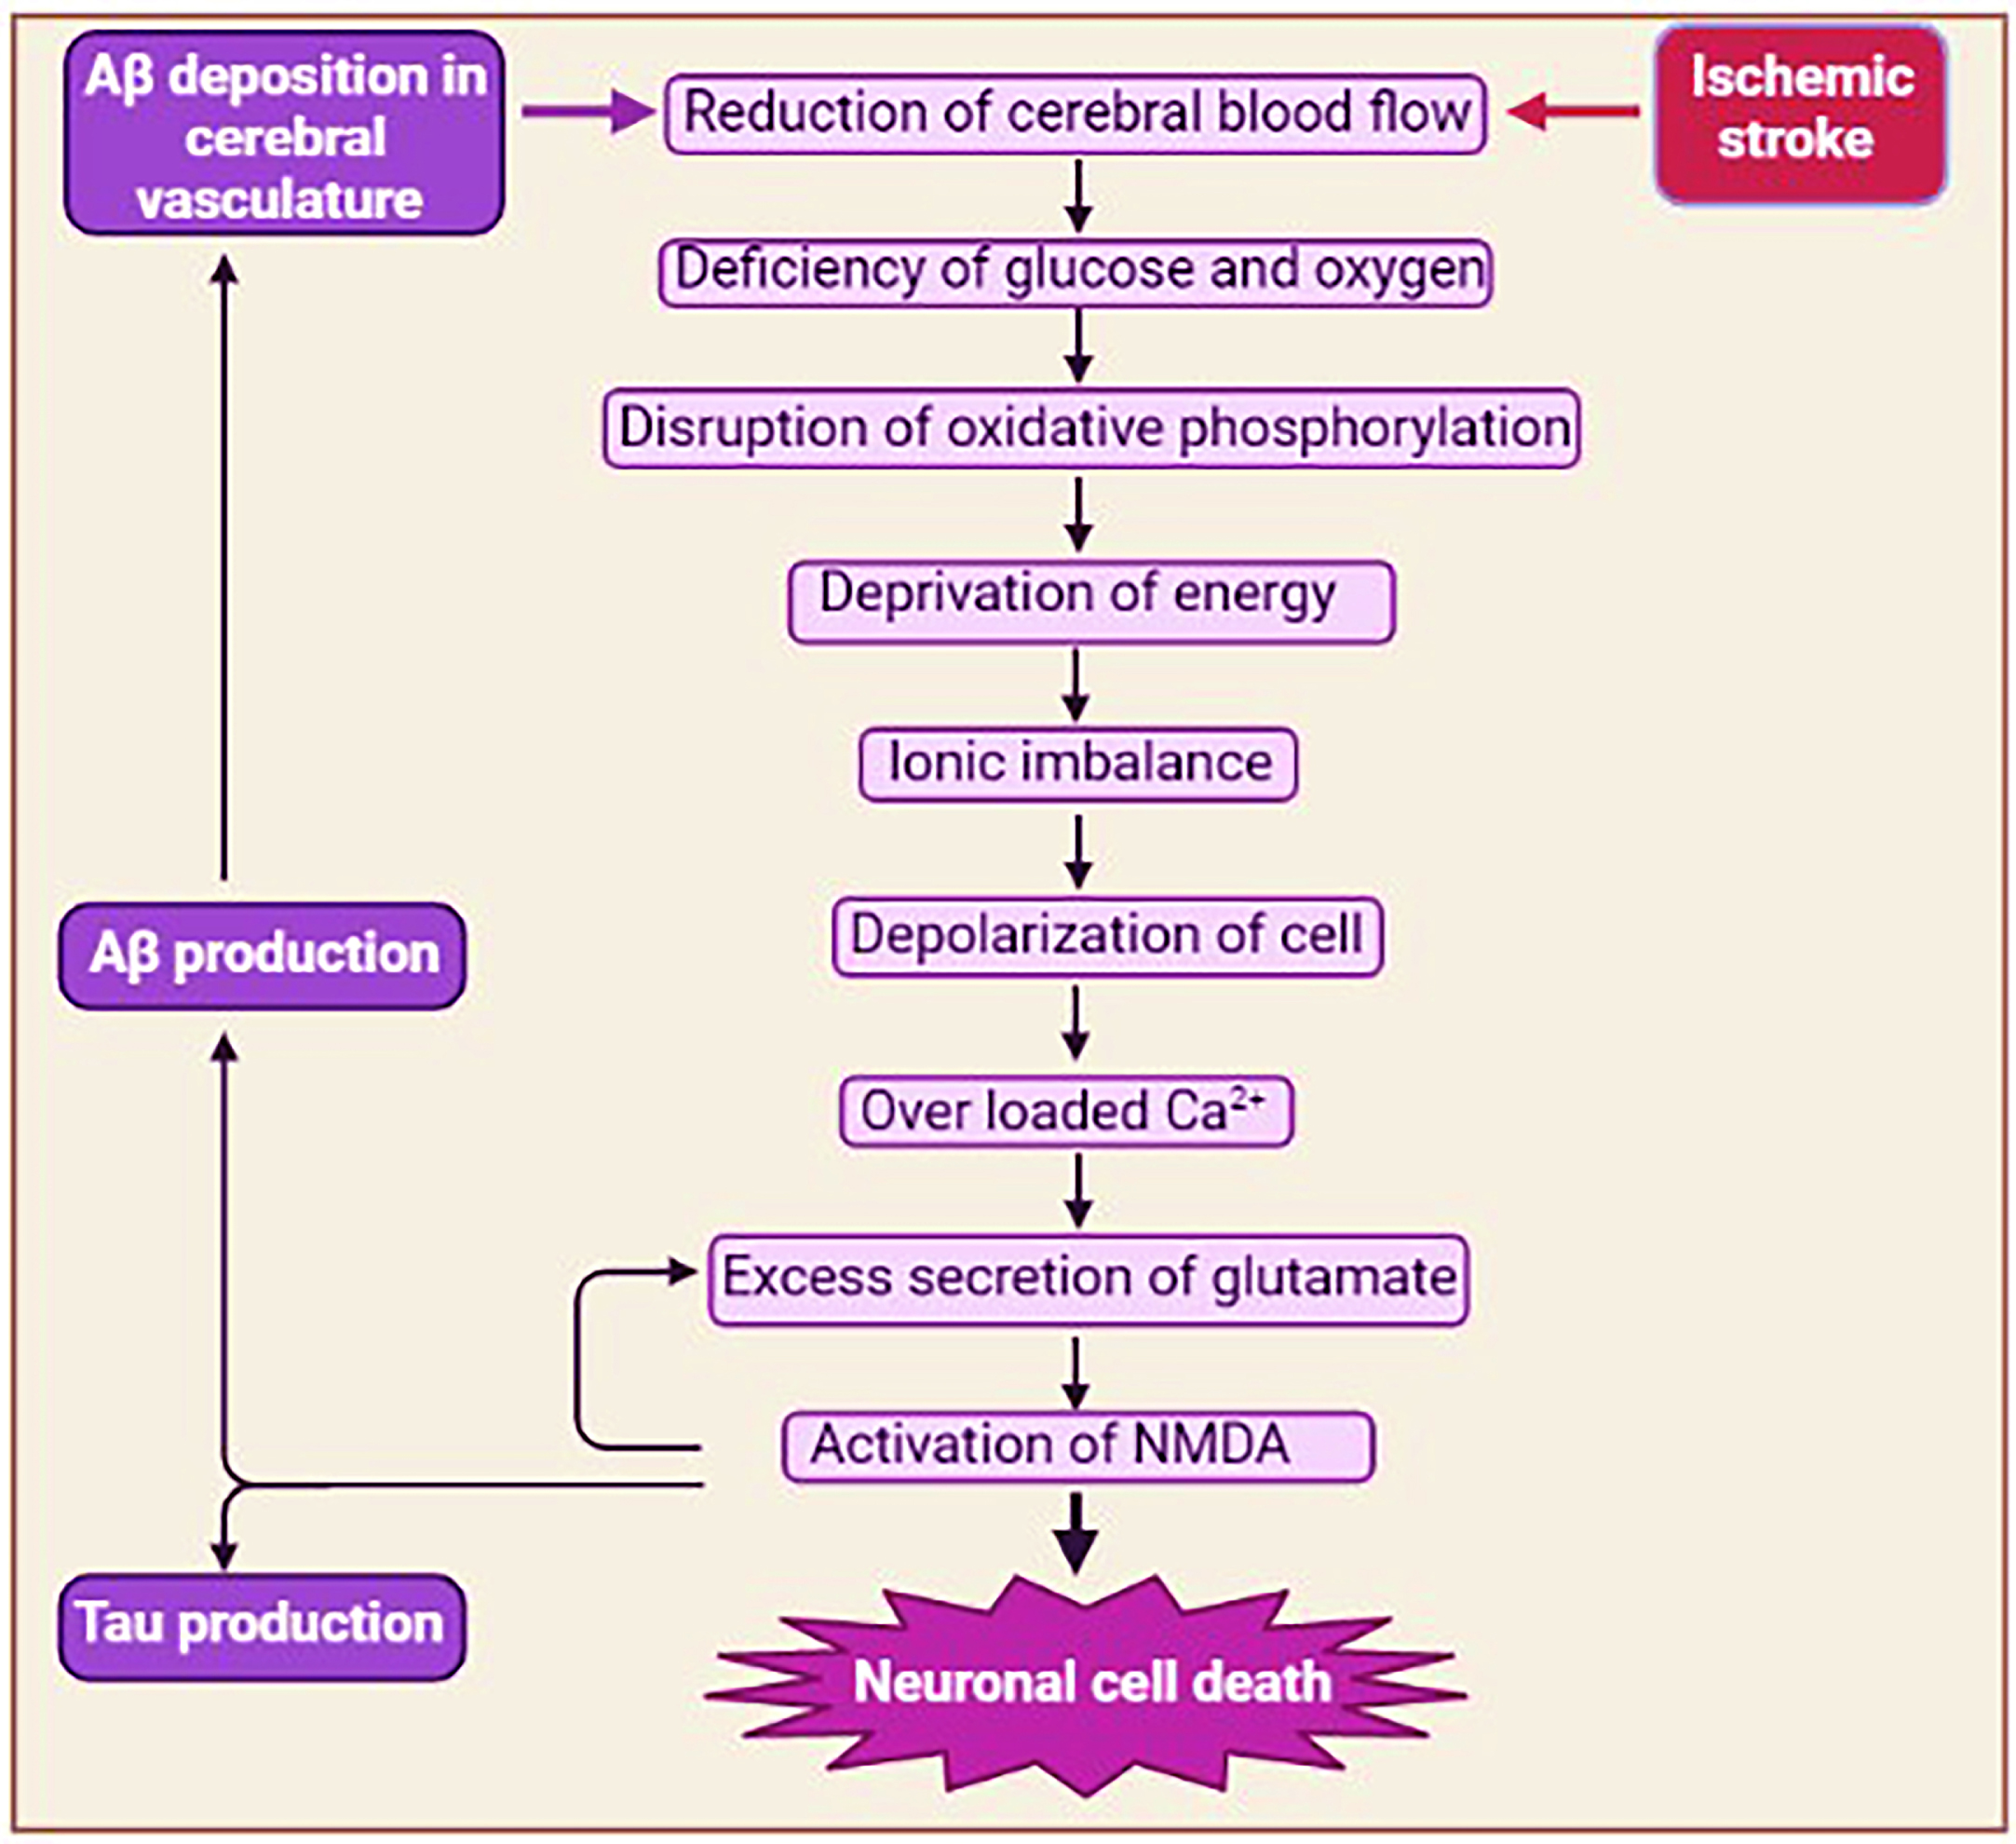 Schematic representation of excitotoxicity pathway in Alzheimer’s disease (AD) and ischemic stroke. In AD, Aβ deposition reduces the blood flow in the brain and causes excitotoxicity by the excess secretion of glutamate. In addition, activation of extrasynaptic N-methyl-D-aspartate receptors (NMDA) accelerates the production of Aβ and tau protein in AD [24, 25]. Similarly, in ischemic stroke reduced blood flow in the brain causes neuronal cell death.